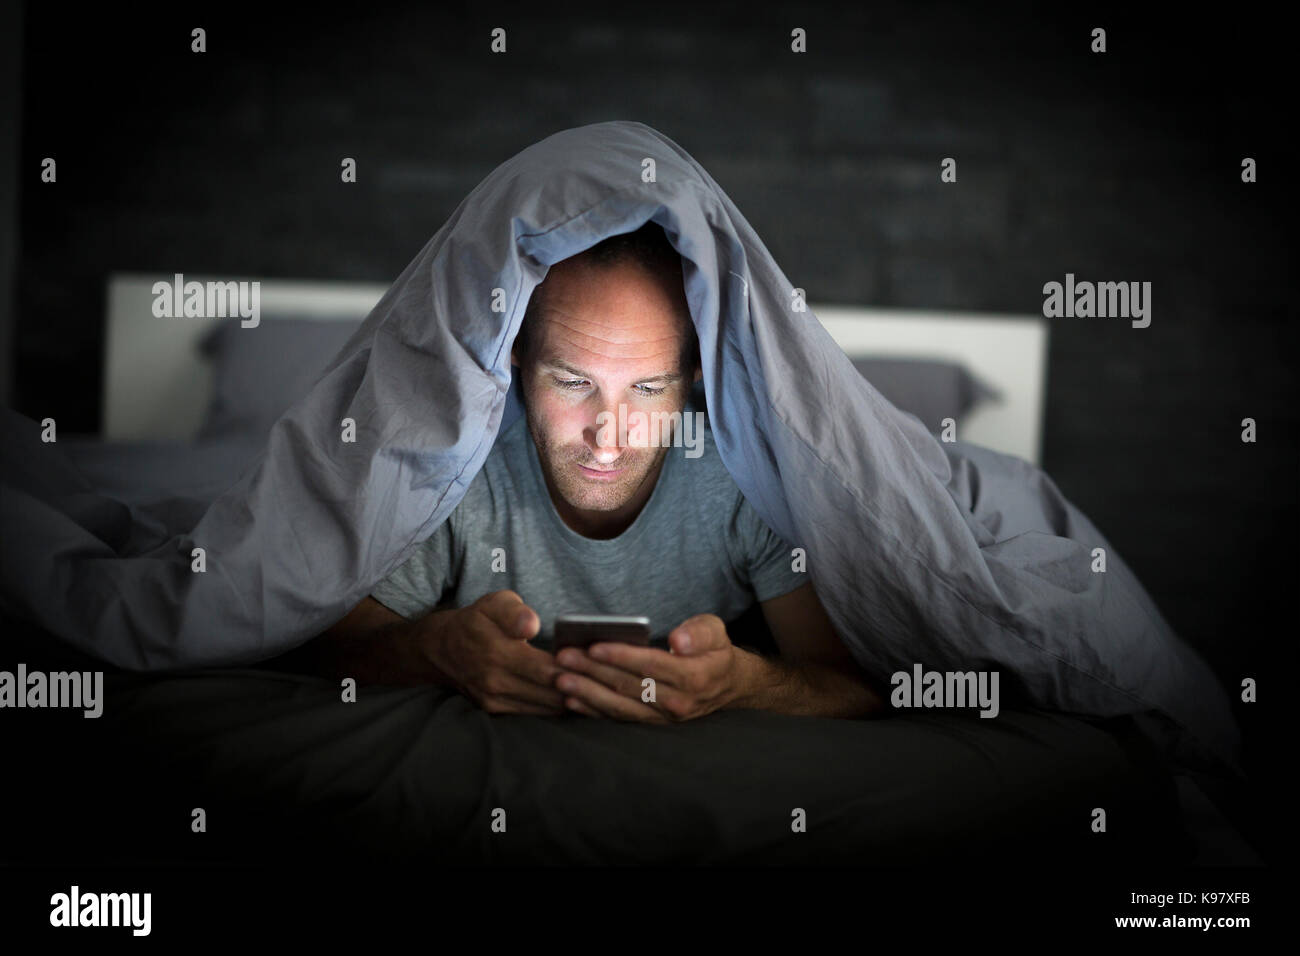 young cell phone addict man awake late at night in bed using smartphone Stock Photo